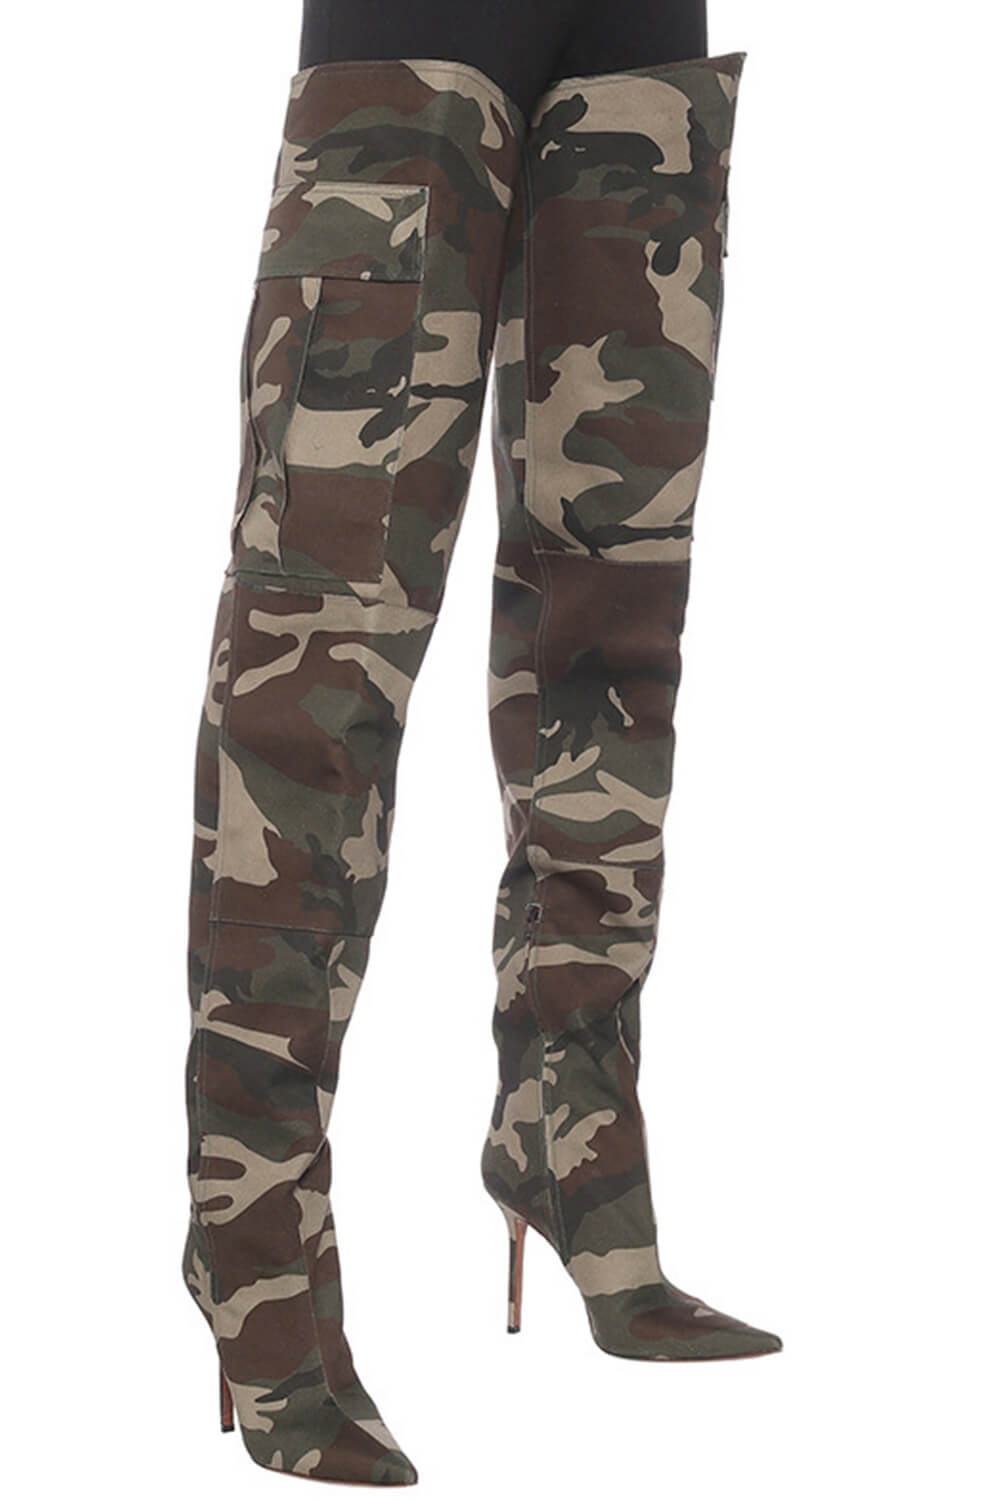 Camo Canvas Pocket Pointy Toe Over-The-Knee High Stiletto Boots